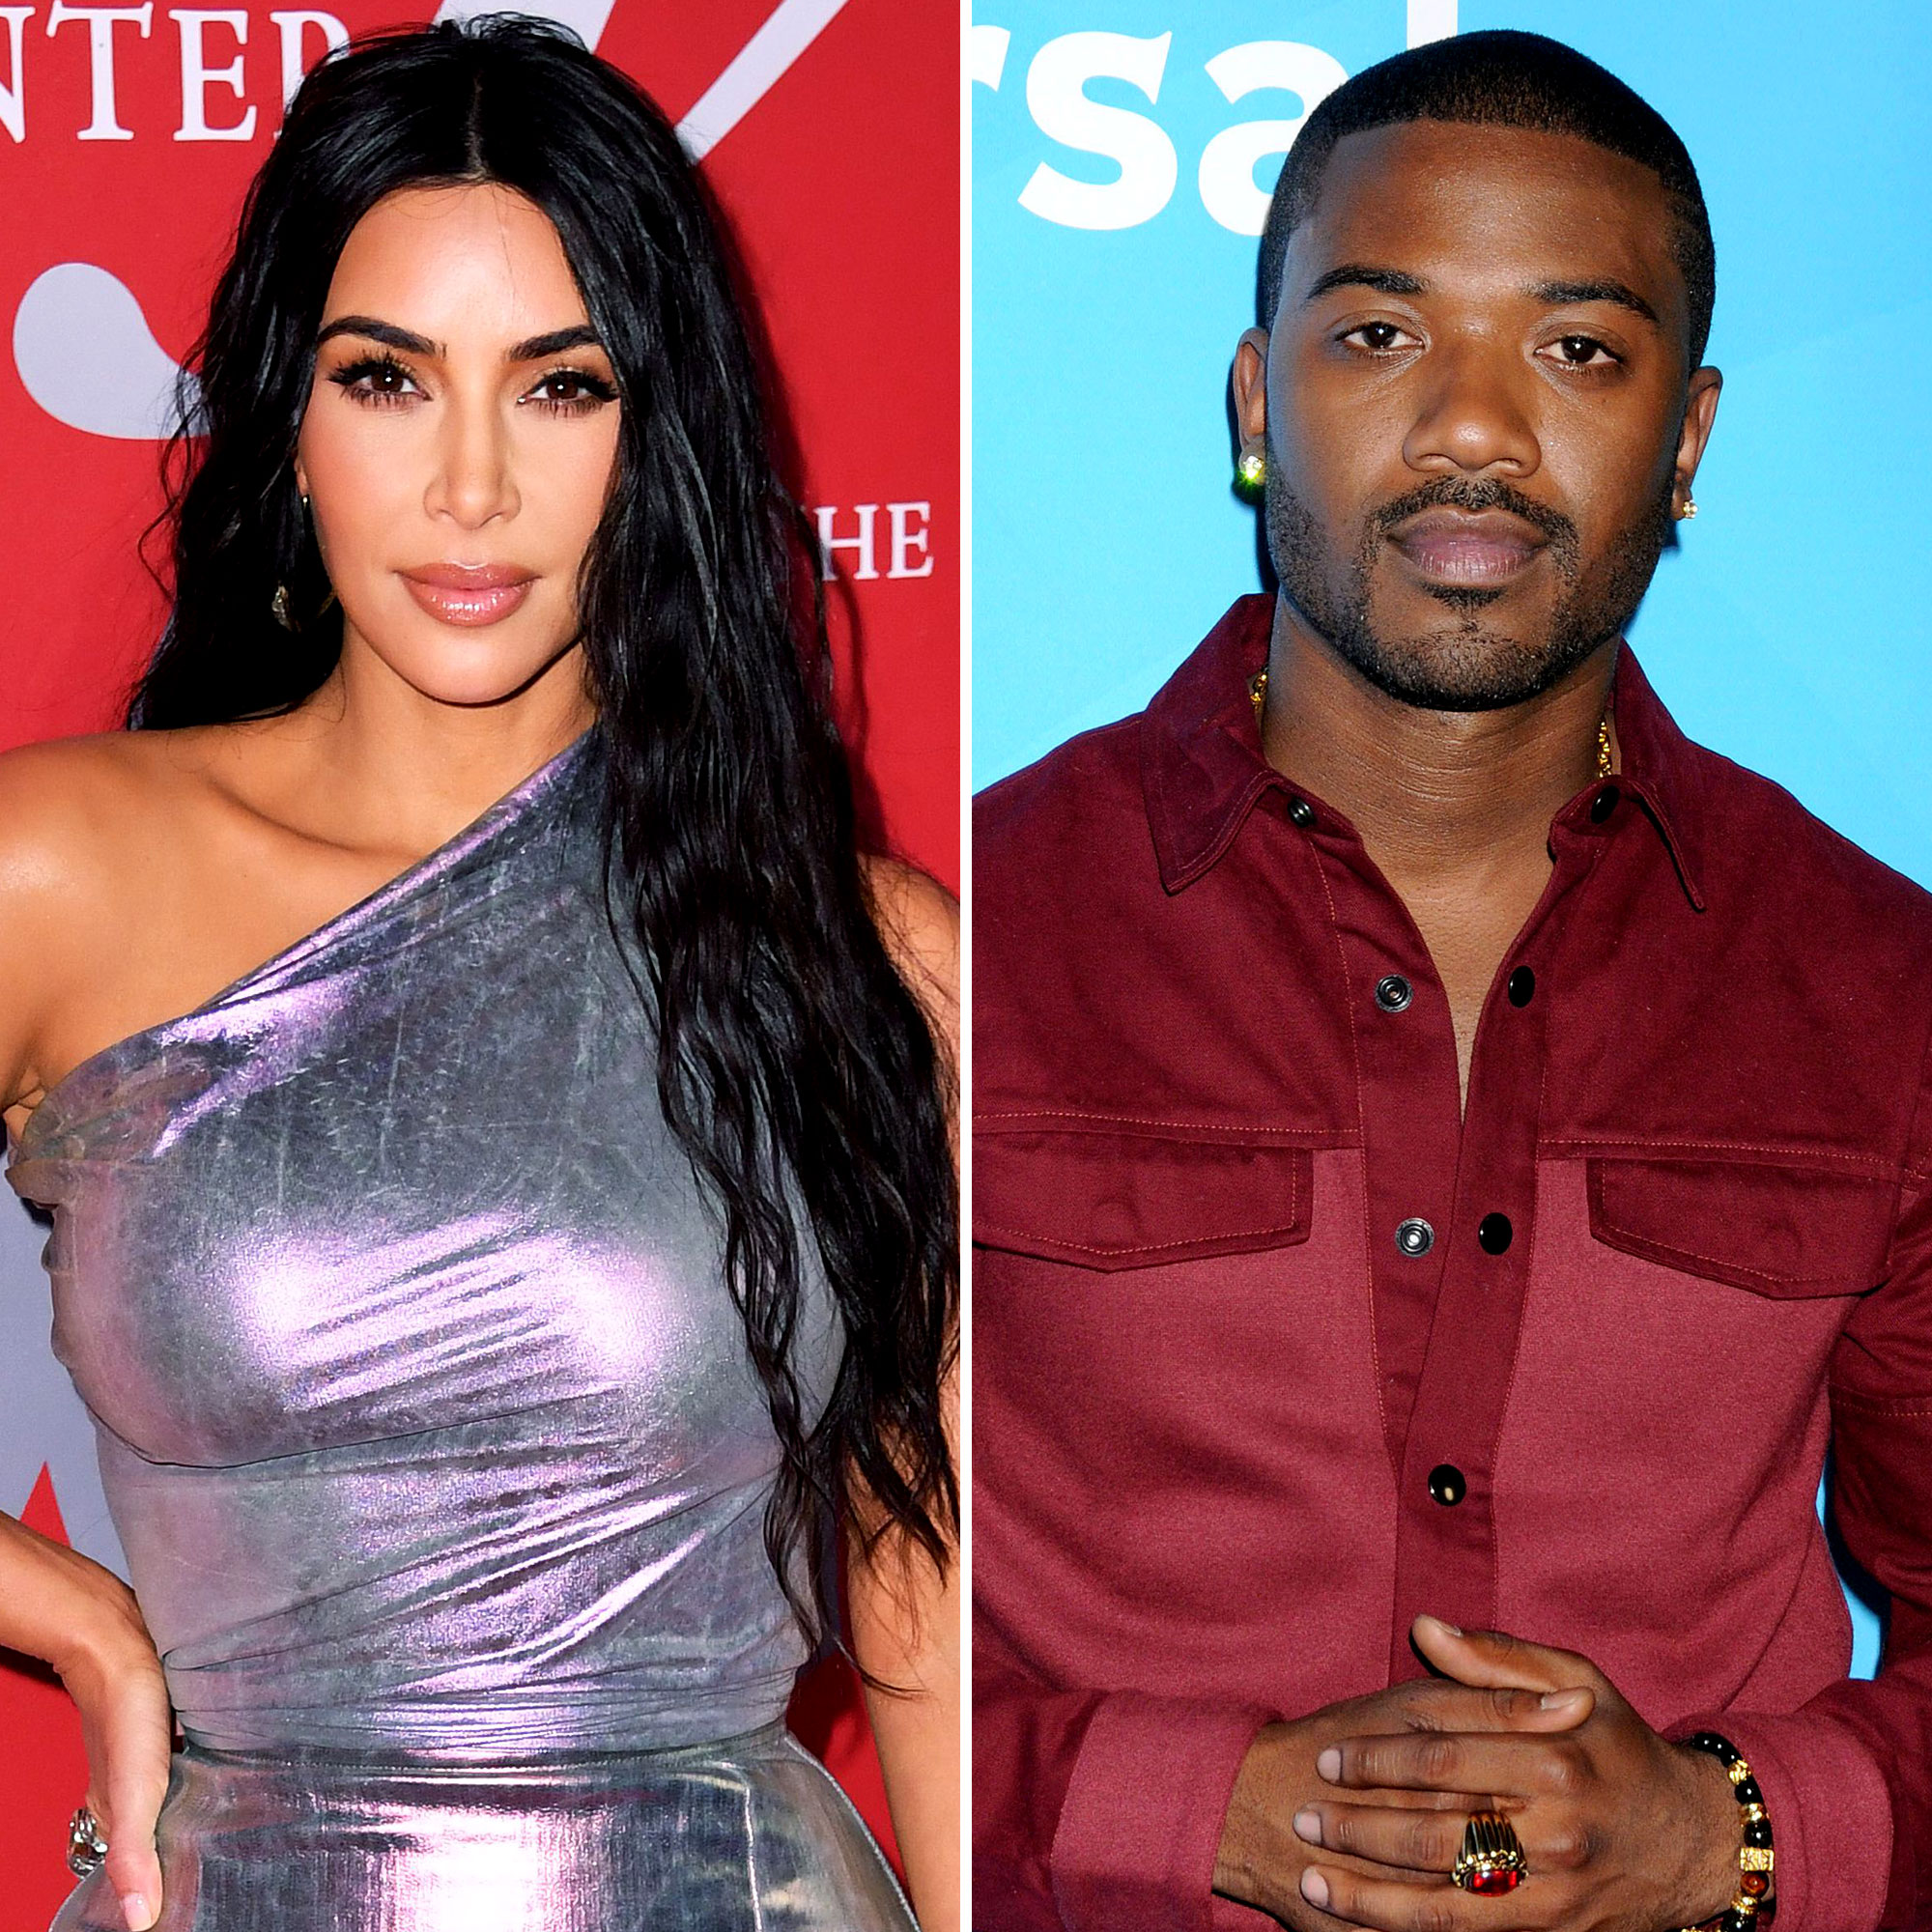 chris yardy recommends kardasian and ray j pic